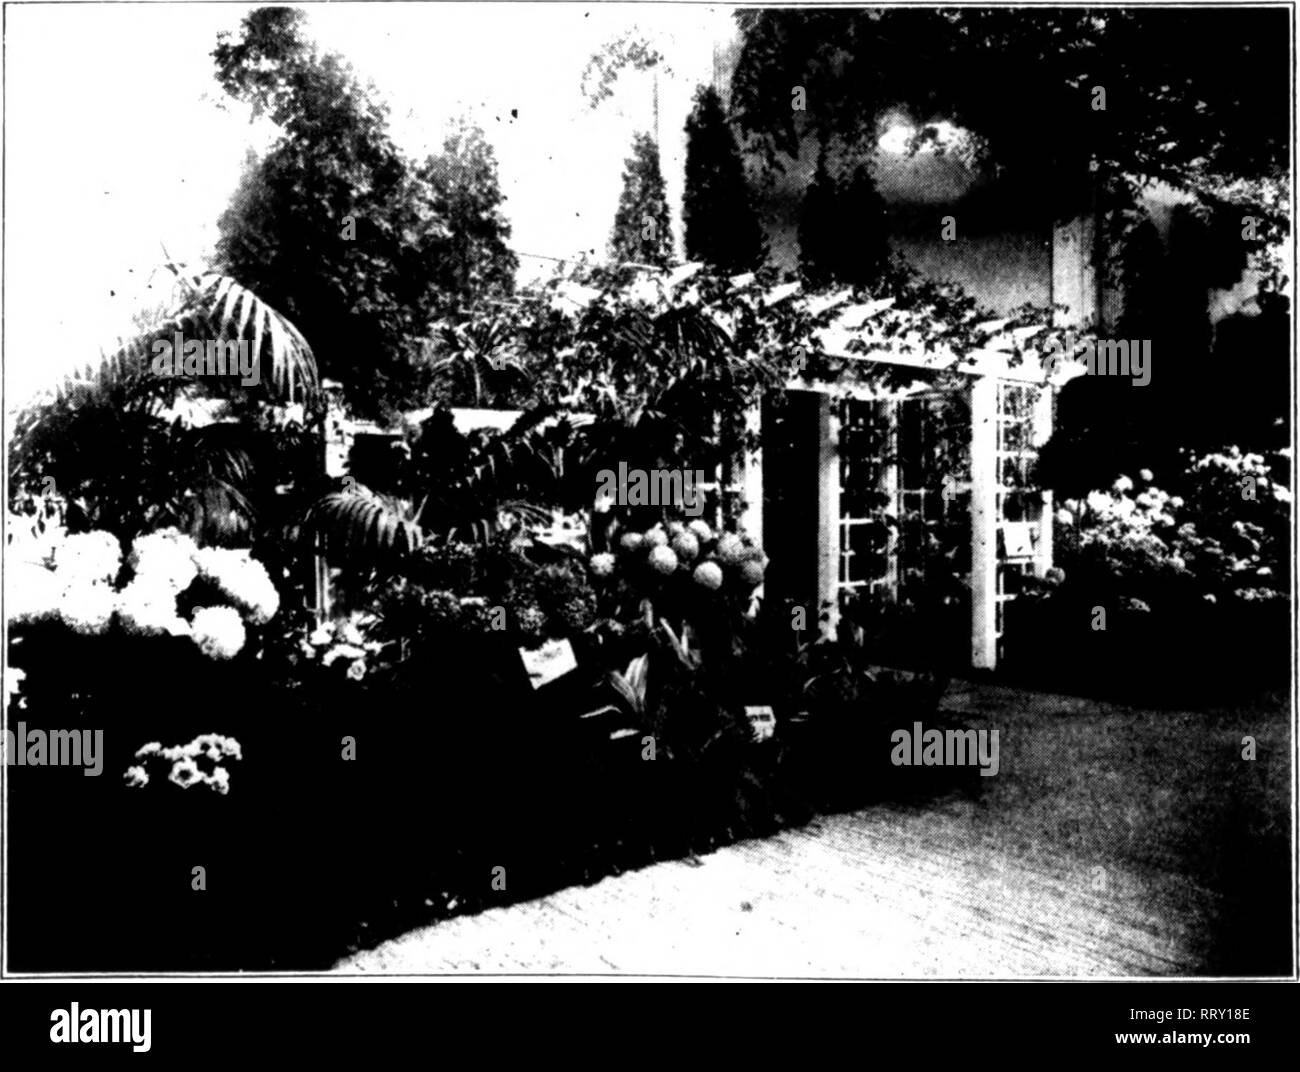 . Florists' review [microform]. Floriculture. A View of the Rochester Flower Show. studiously kept in the liack;^rouiid. Tliere was no coiiiiiet ition for pri/cs and all schemes of the exhibitors to adver- tise thems(d('s were rij^orously riib'd out. Tlie Were allowed only to put their name nn their exhibits on incoii- s|dcuoiis. uniform cards. They were also forced to liavc their exhibits harmoni/e with Ihe general scheme of decoration. . ciic atmosphere was f^iveii by the fact that K'oihester is wiibdy known as the blower ('ity, and this allowecl the &lt;'liamber of (?ommerce to yie a j Stock Photo